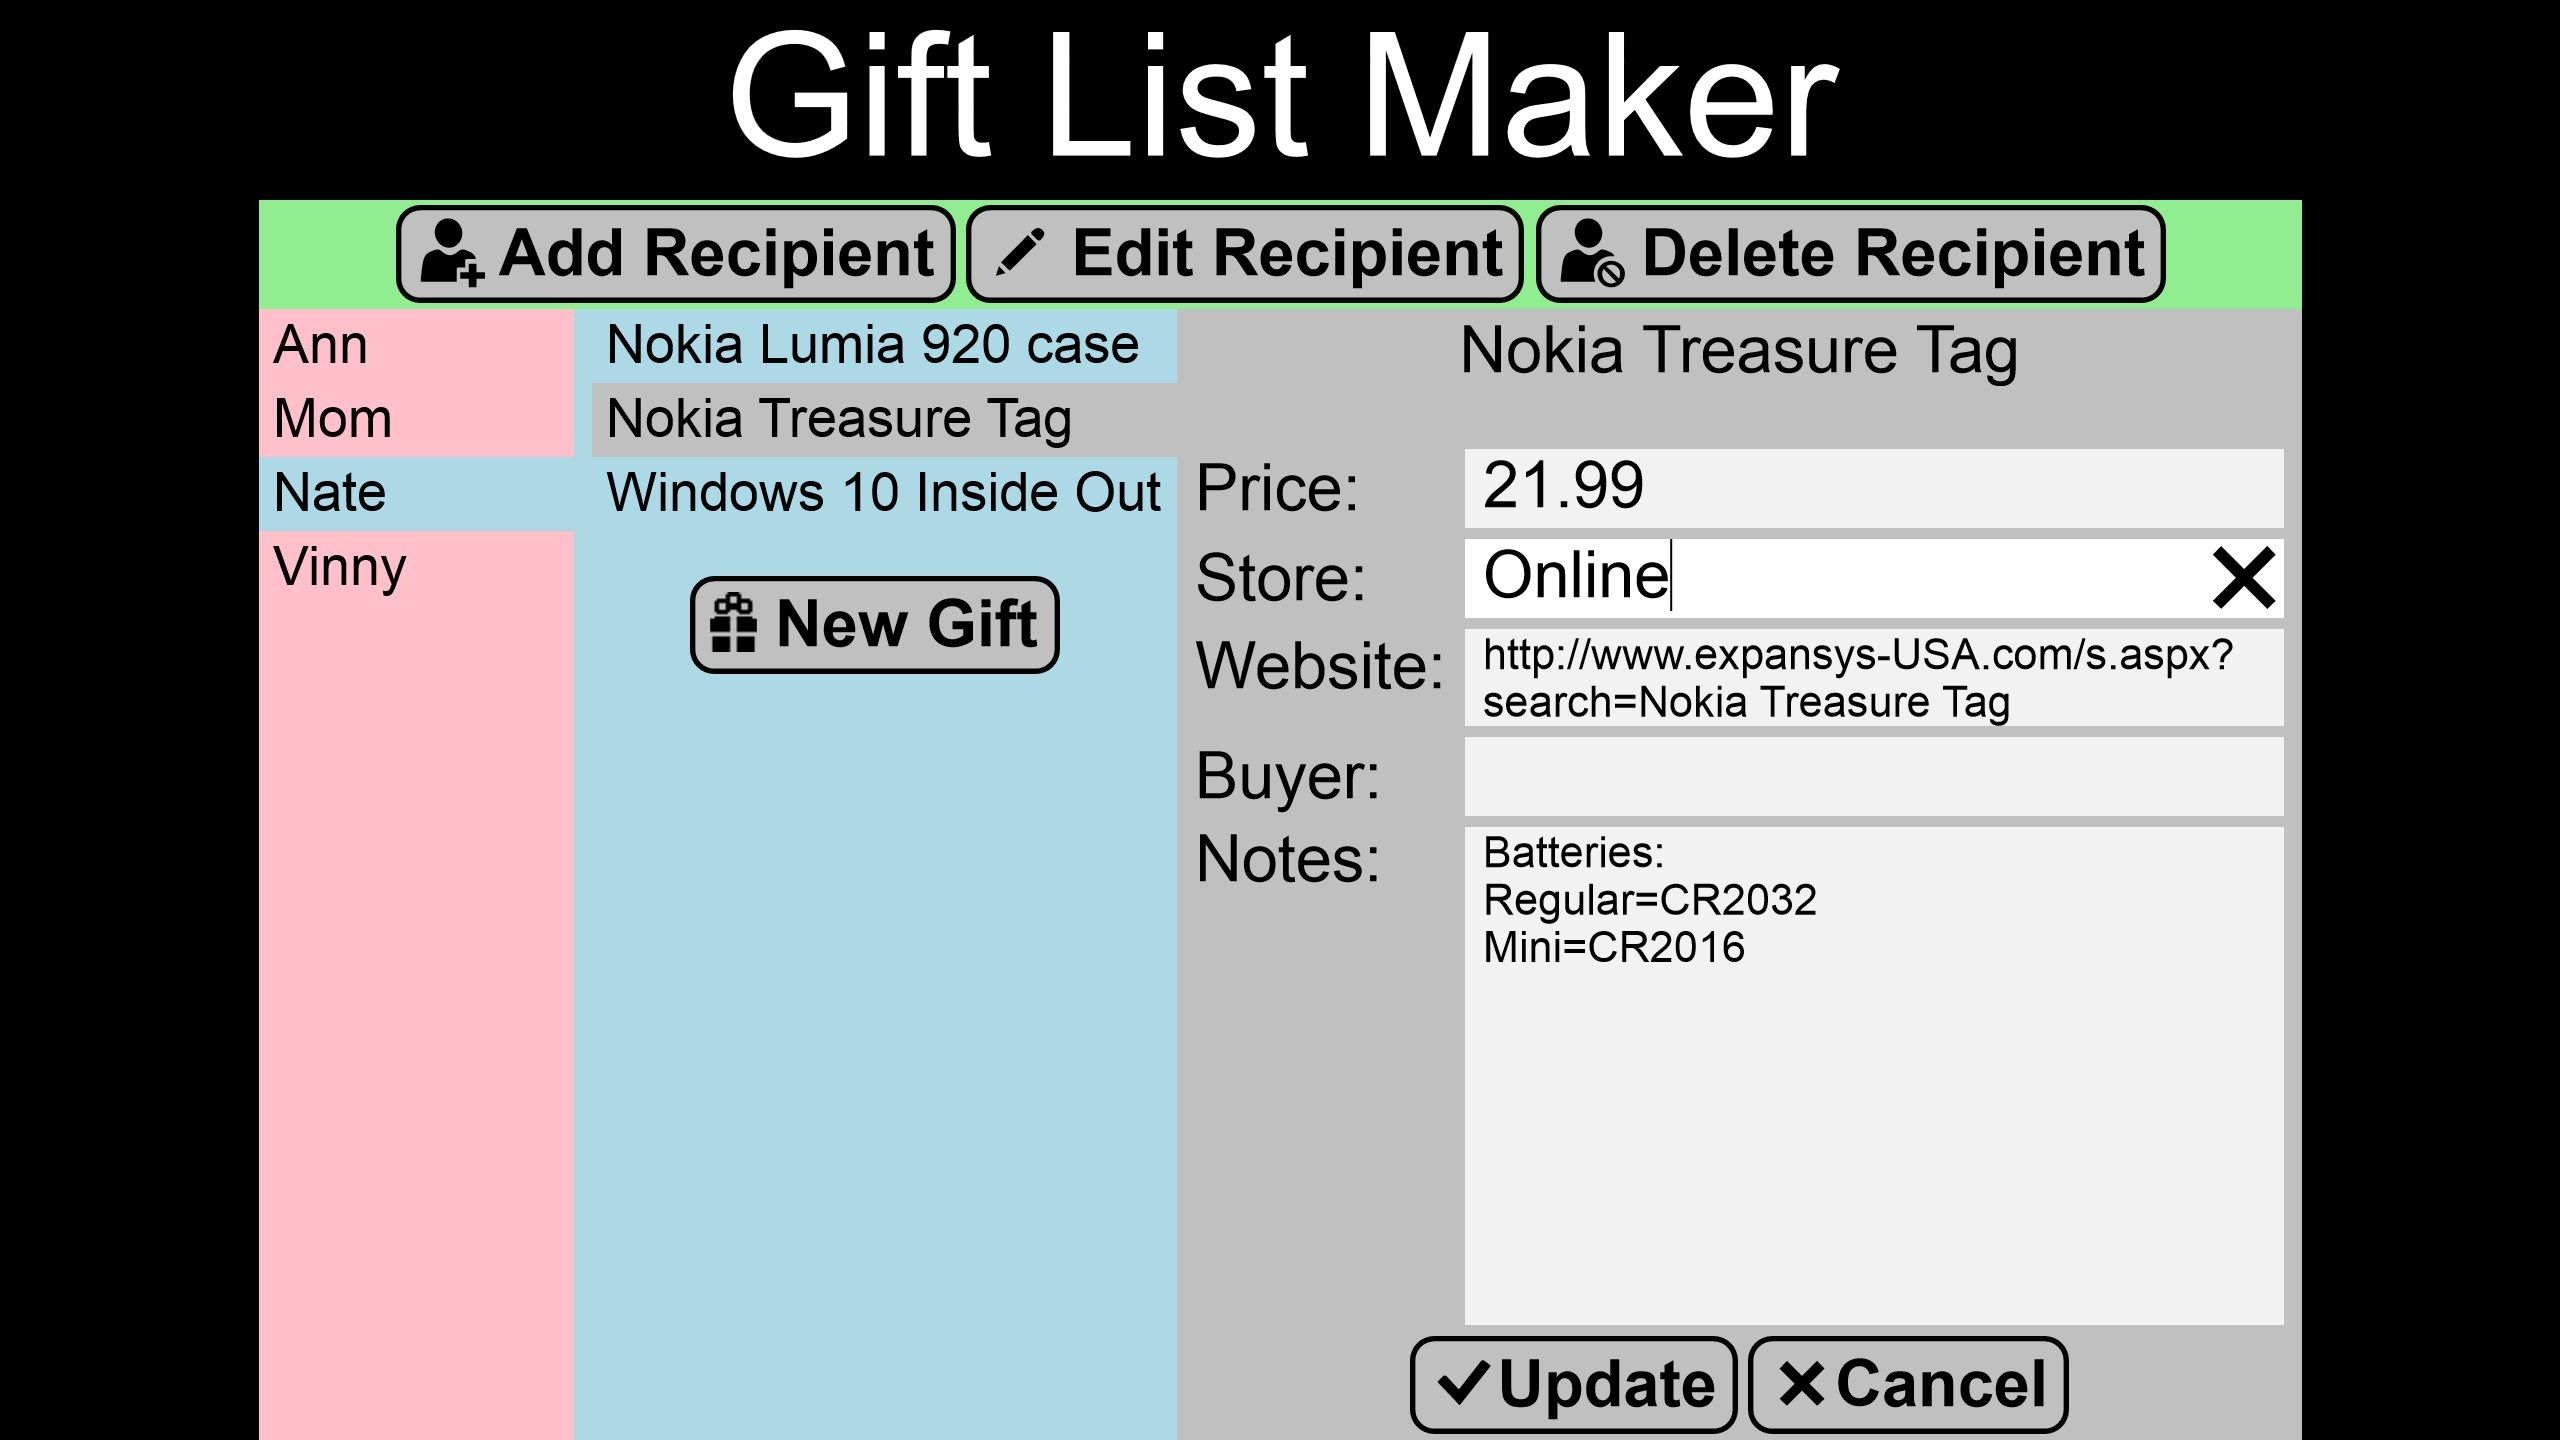 Gifts can be edited & updated